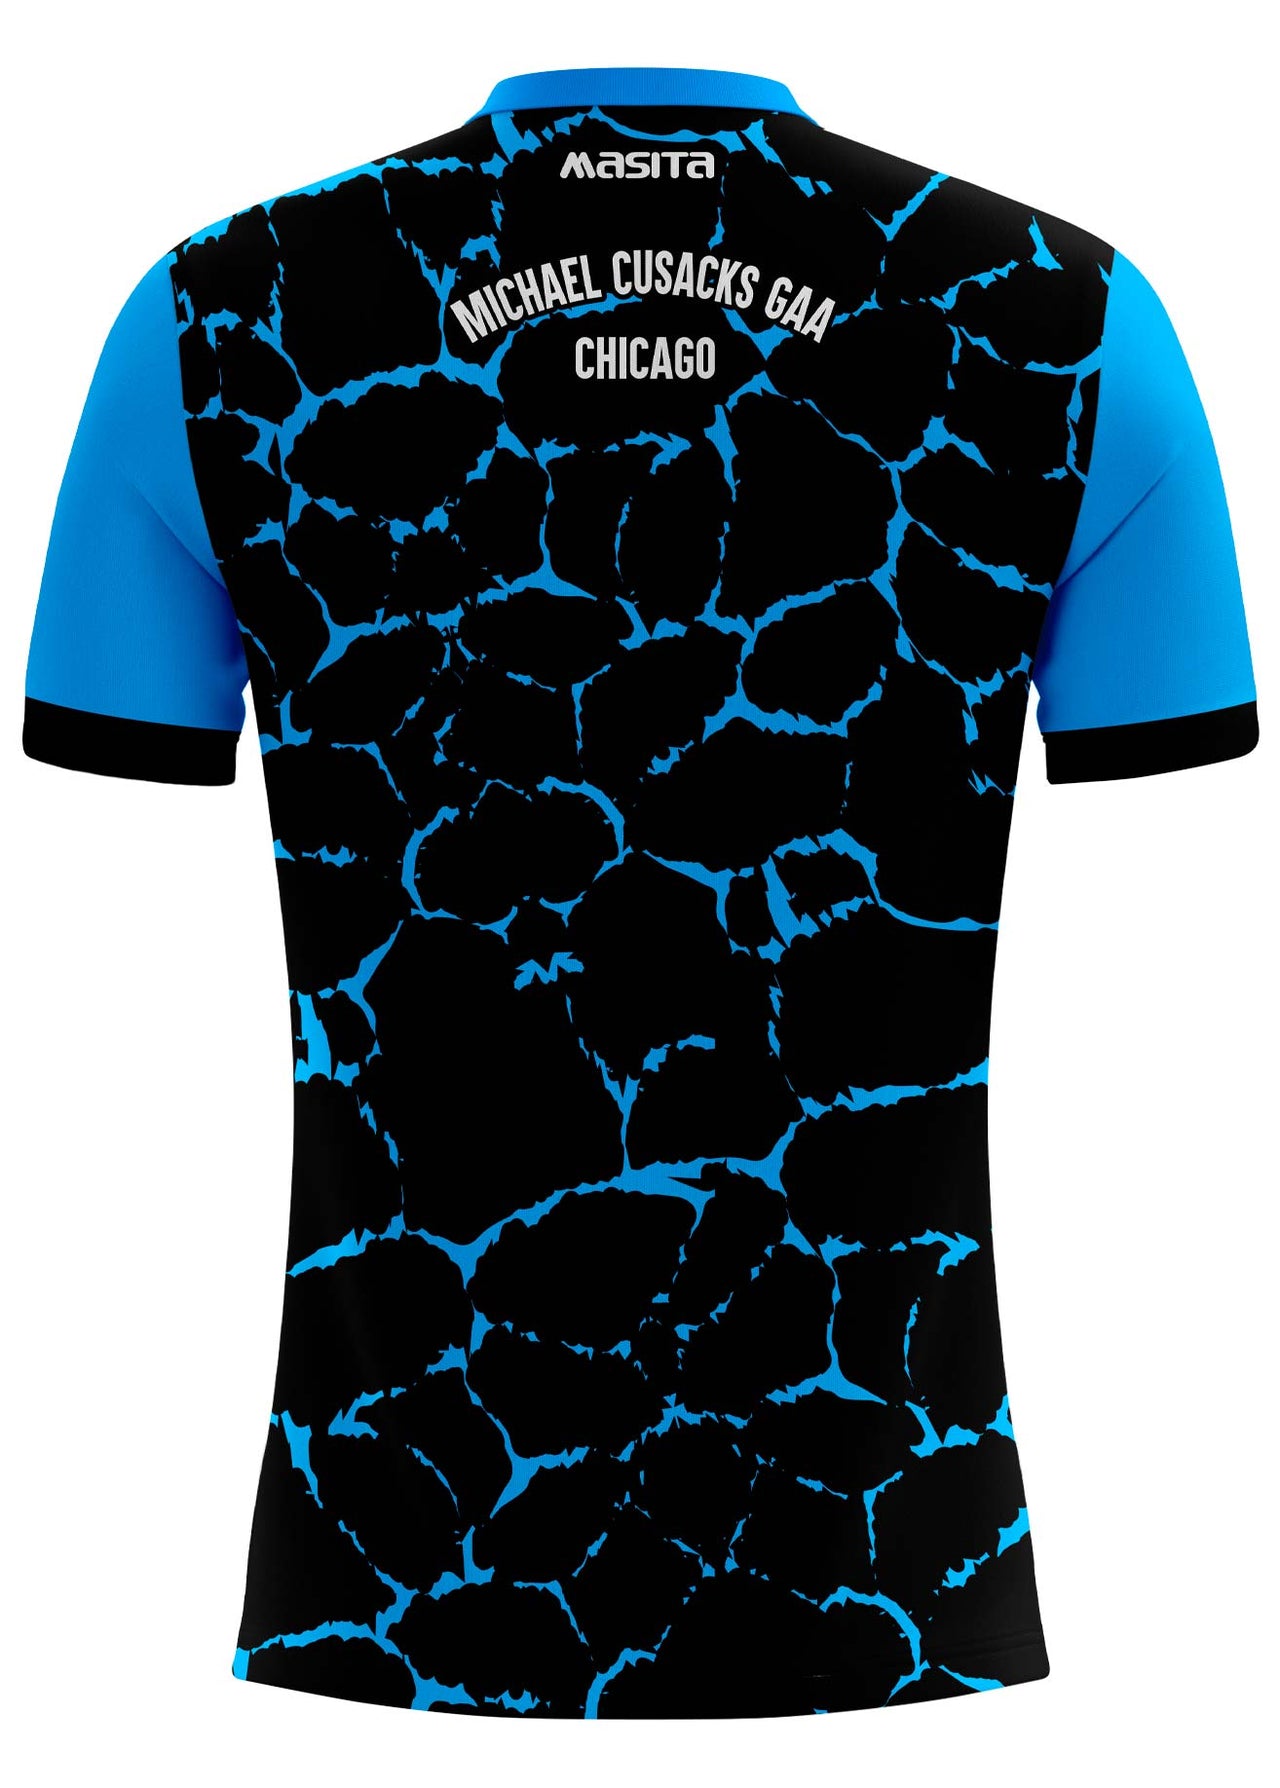 Michael Cusack's HC Chicago Training Jersey Regular Fit Adult